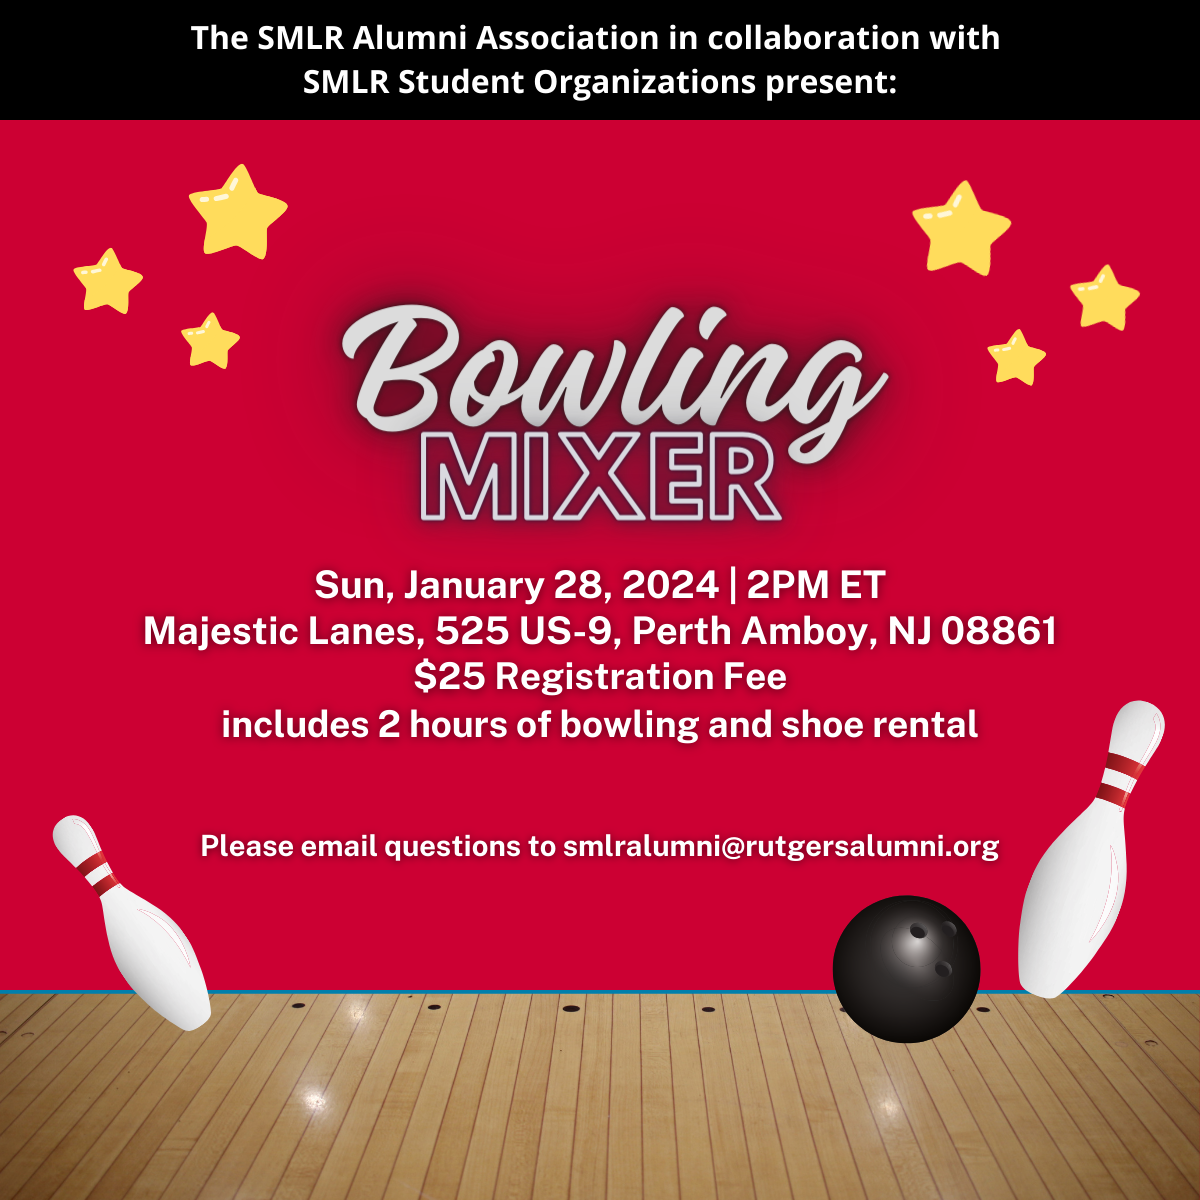 Image of SMLRAA Bowling Mixer event flyer